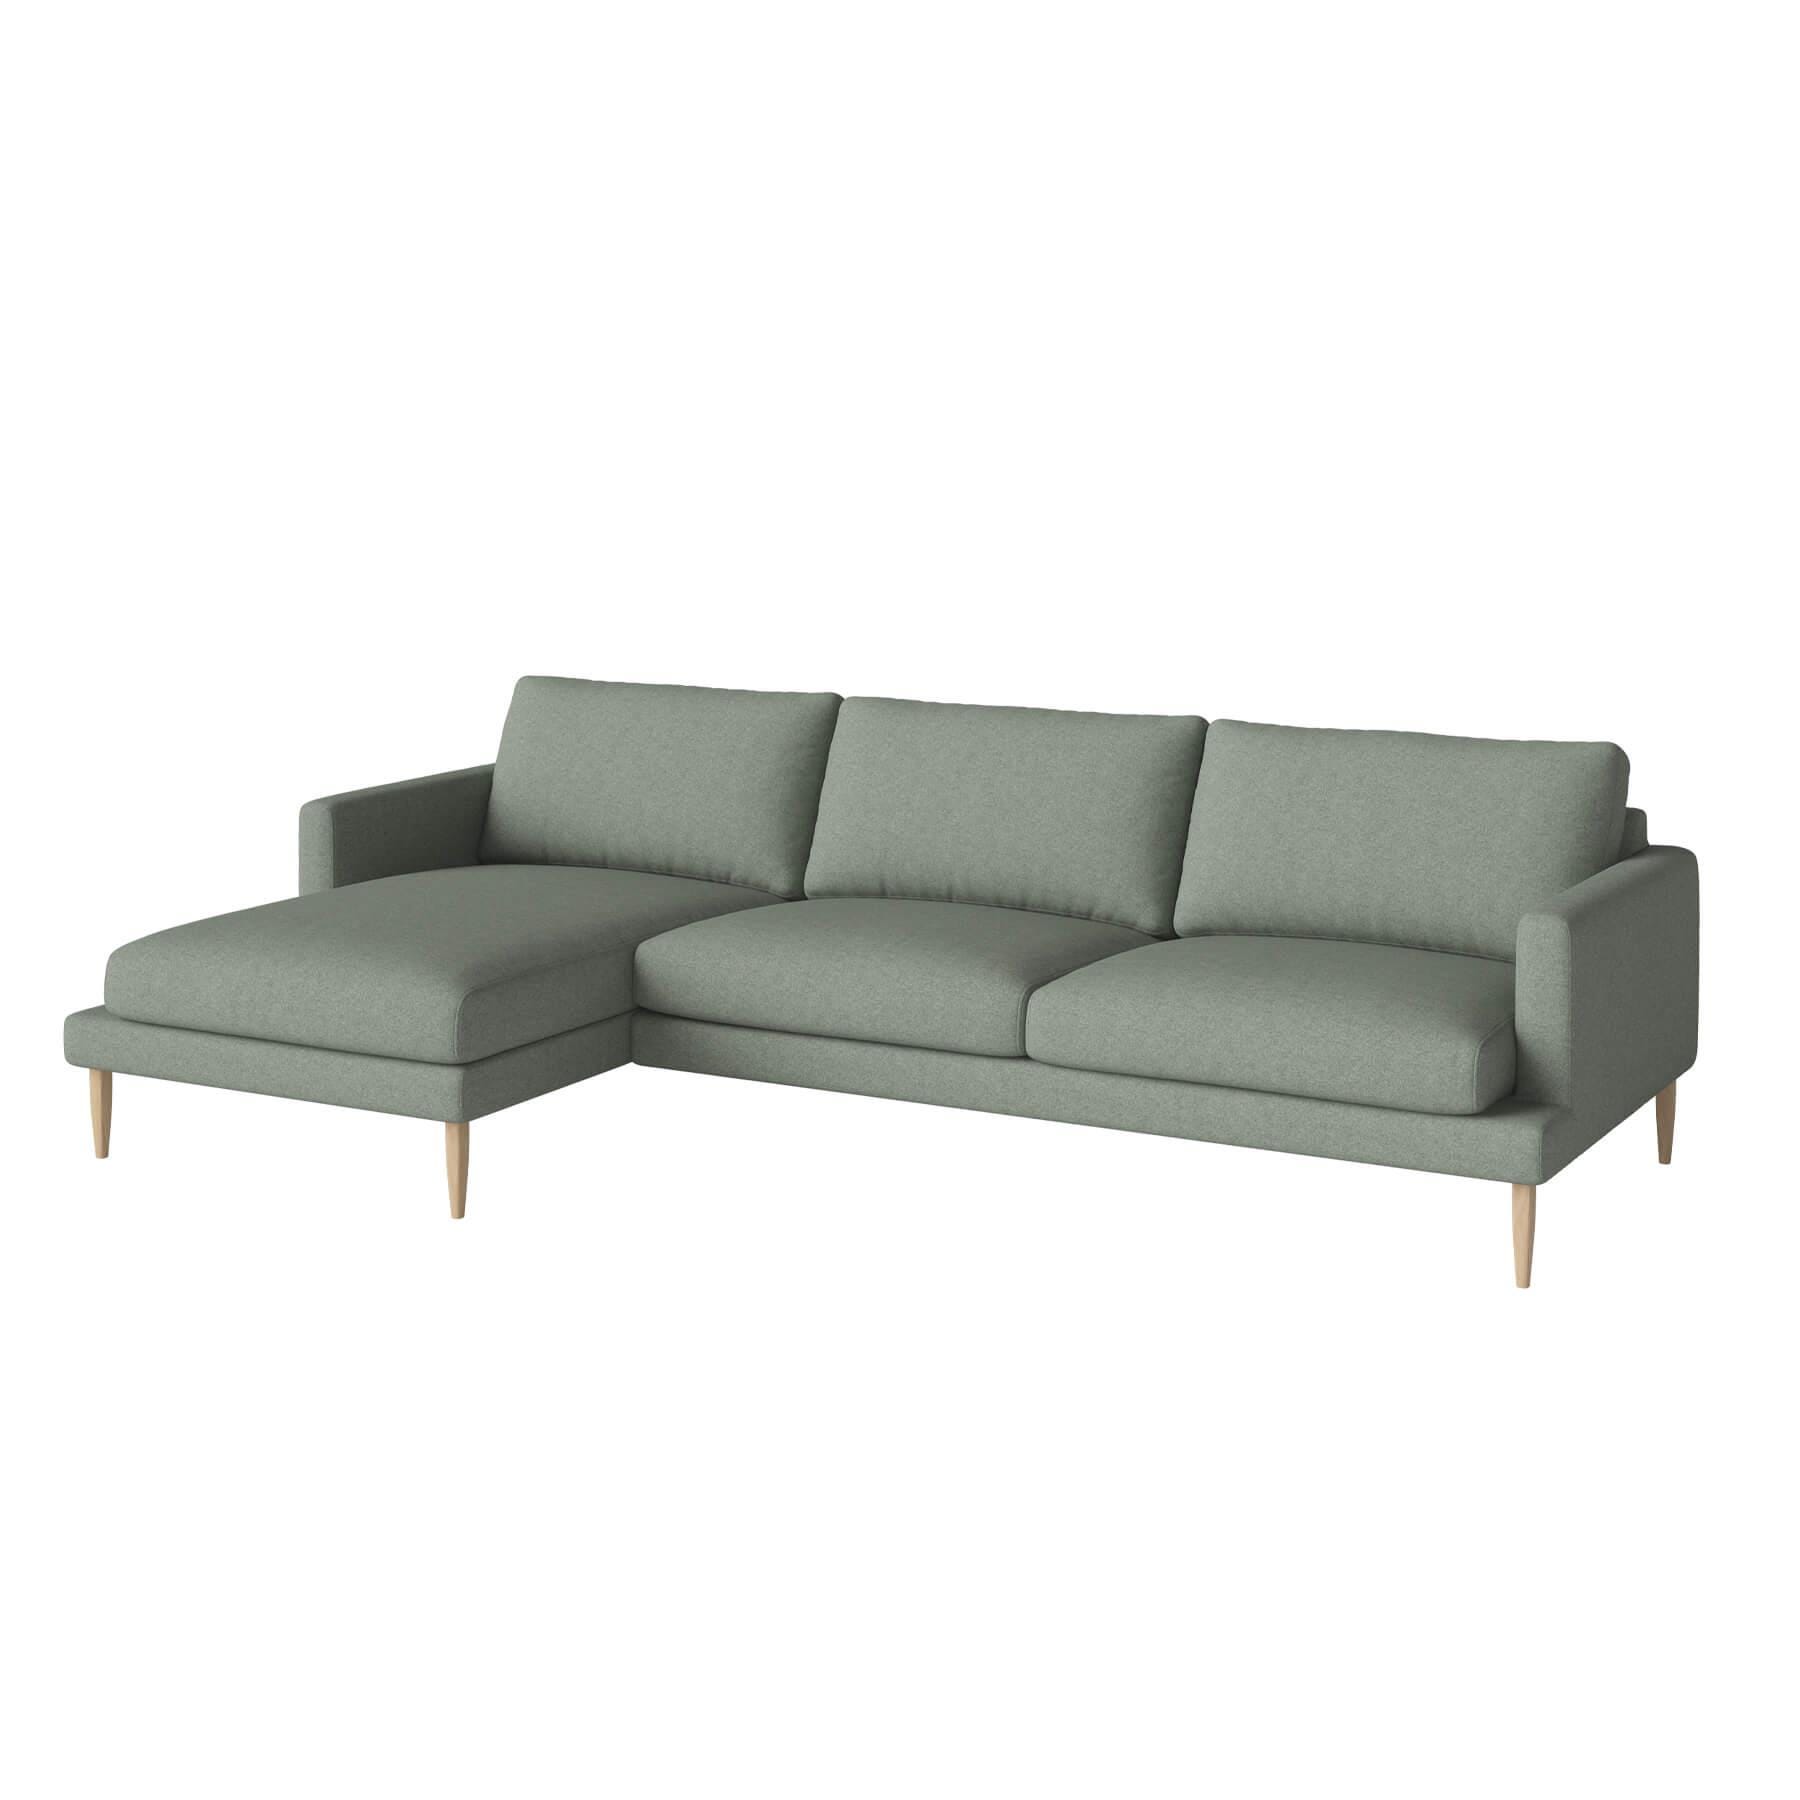 Bolia Veneda Sofa 35 Seater Sofa With Chaise Longue White Oiled Oak Qual Green Left Green Designer Furniture From Holloways Of Ludlow